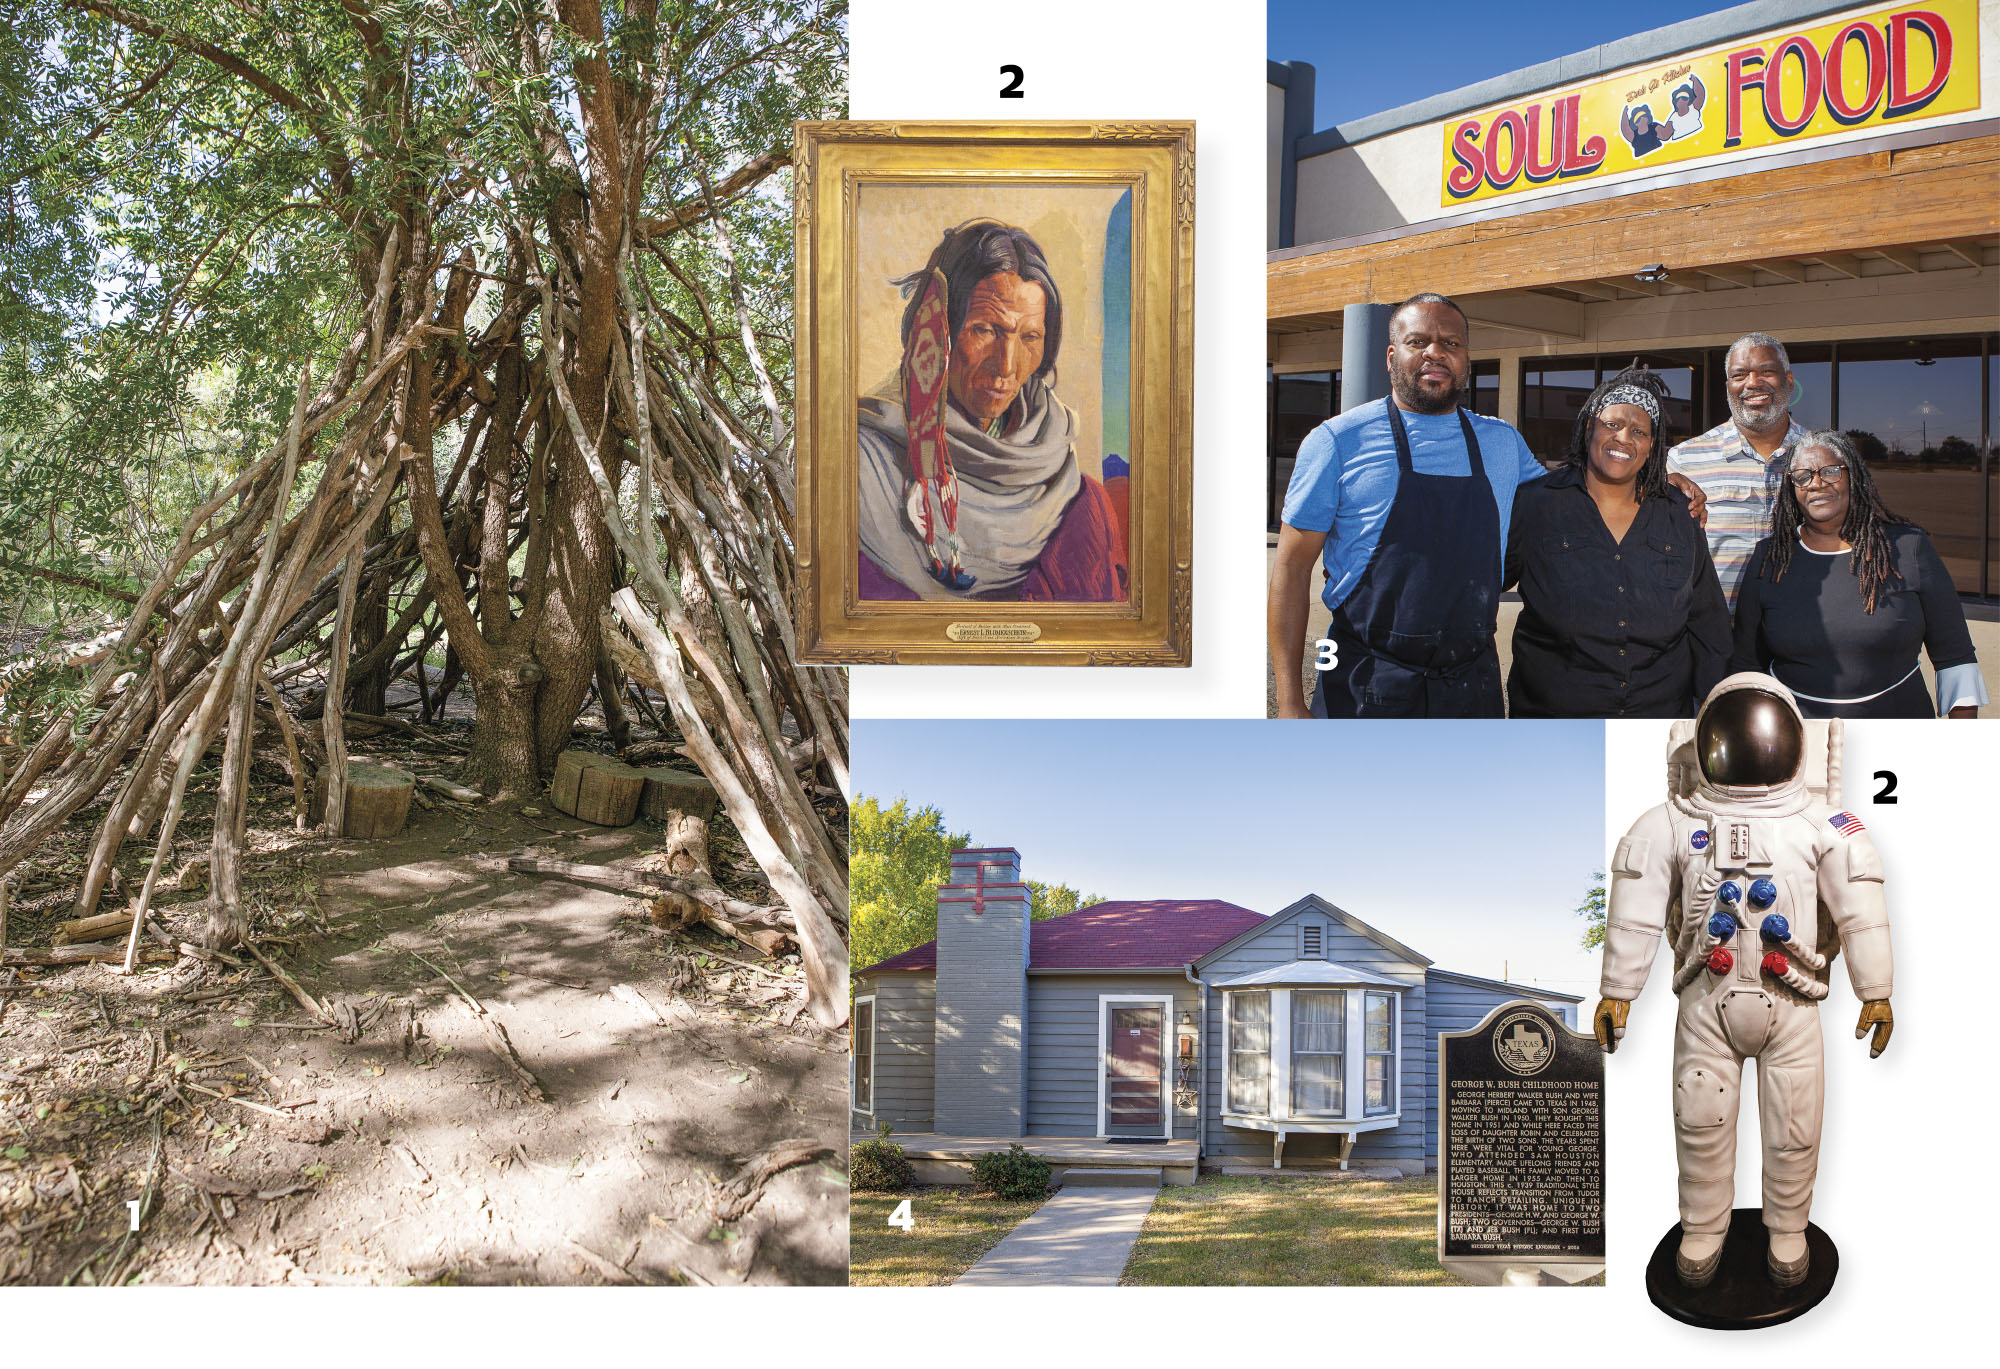 A collection of places and activities in Midland, including an old home, a shelter made of sticks in a tree canopy, a portrait, and two people standing outside of a restaurant